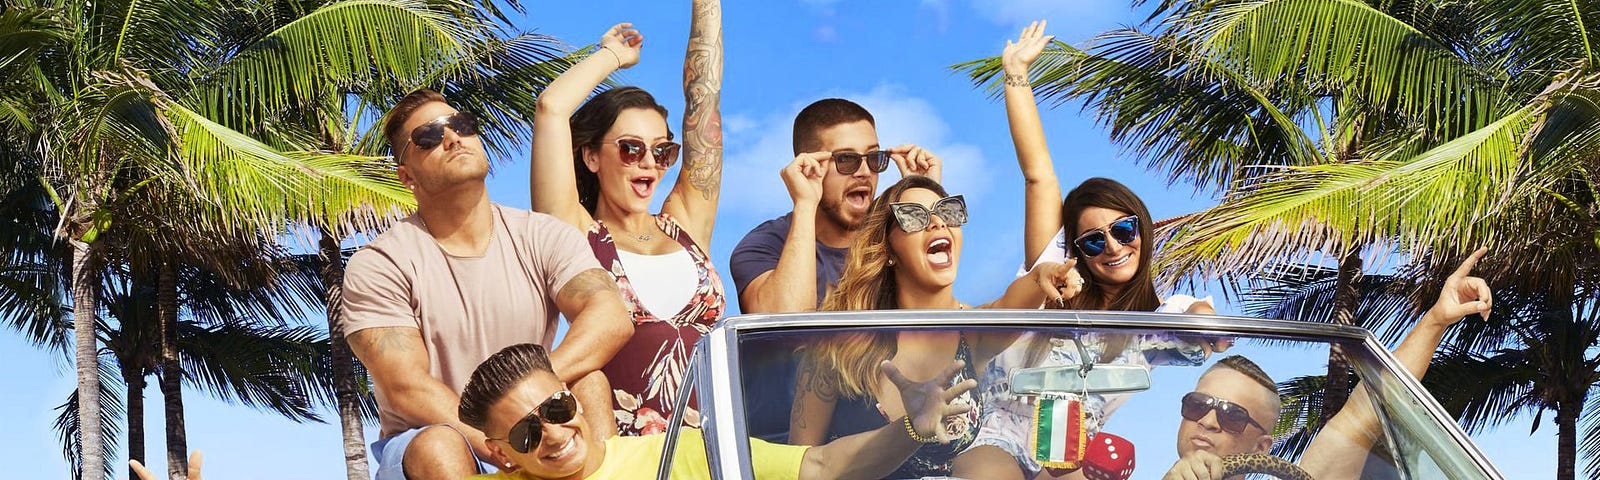 jersey shore family vacation online free